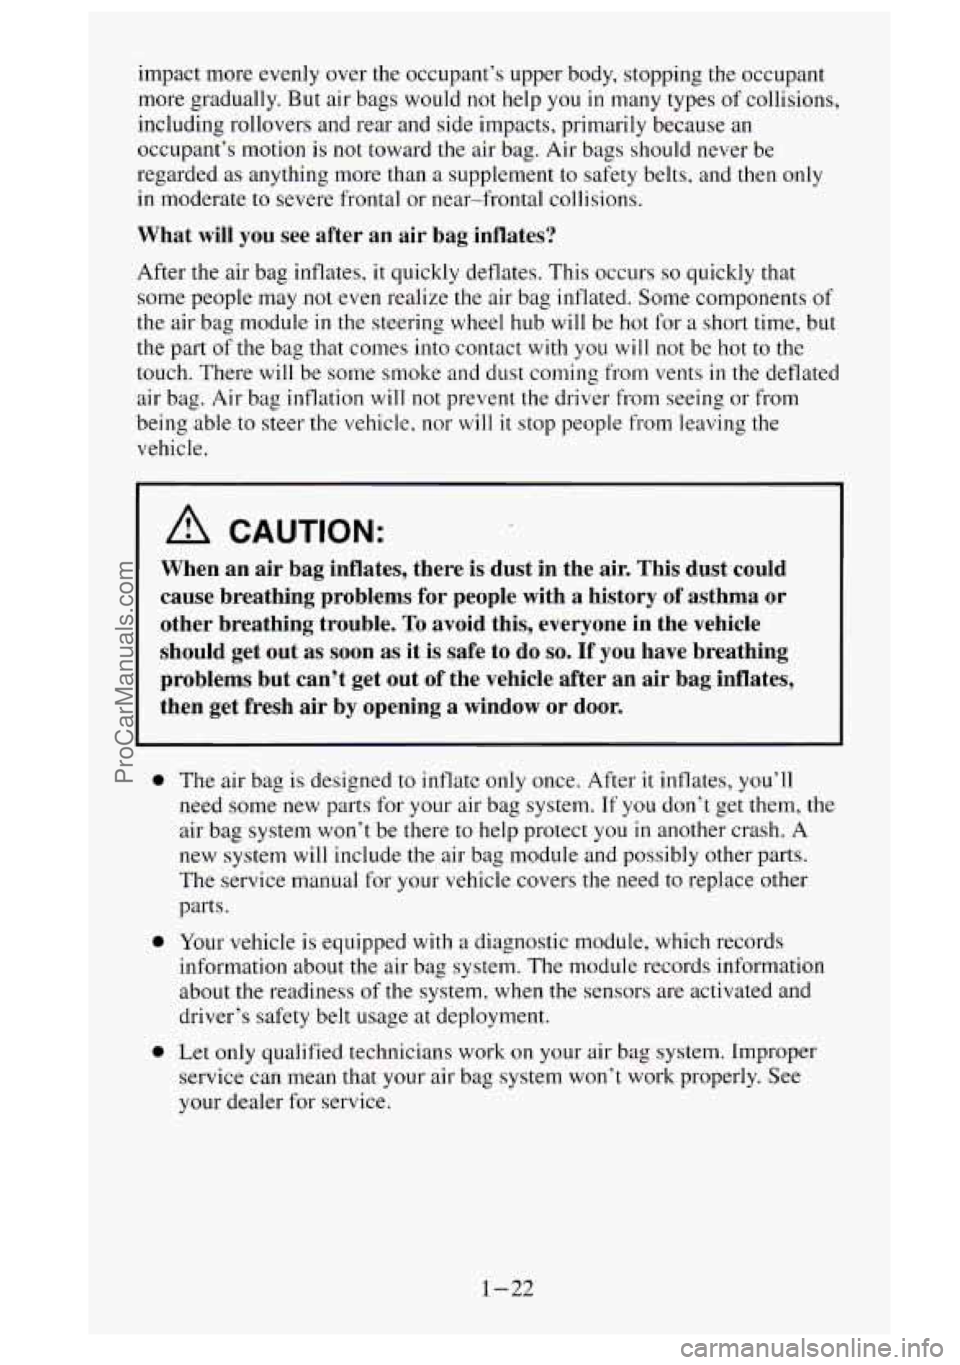 GMC SIERRA 1995  Owners Manual impact more evenly  over  the occ.upant’s upper body, stopping the occupant 
more gradually. But  air bags  would  not  help you 
in many types  of collisions, 
including rollovers  and rear and sid